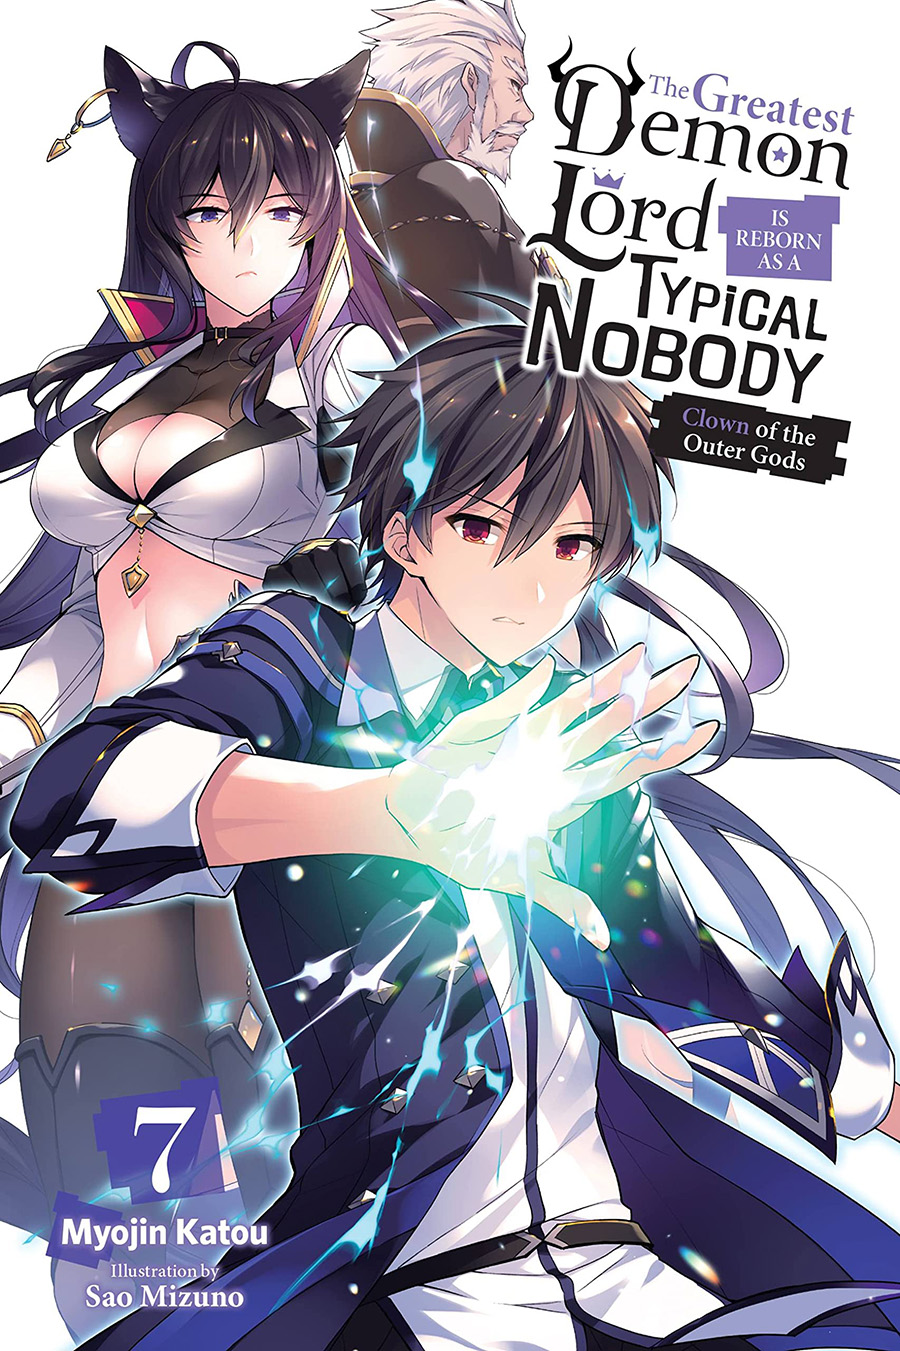 Greatest Demon Lord Is Reborn As A Typical Nobody Light Novel Vol 7 Clown Of The Outer Gods TP